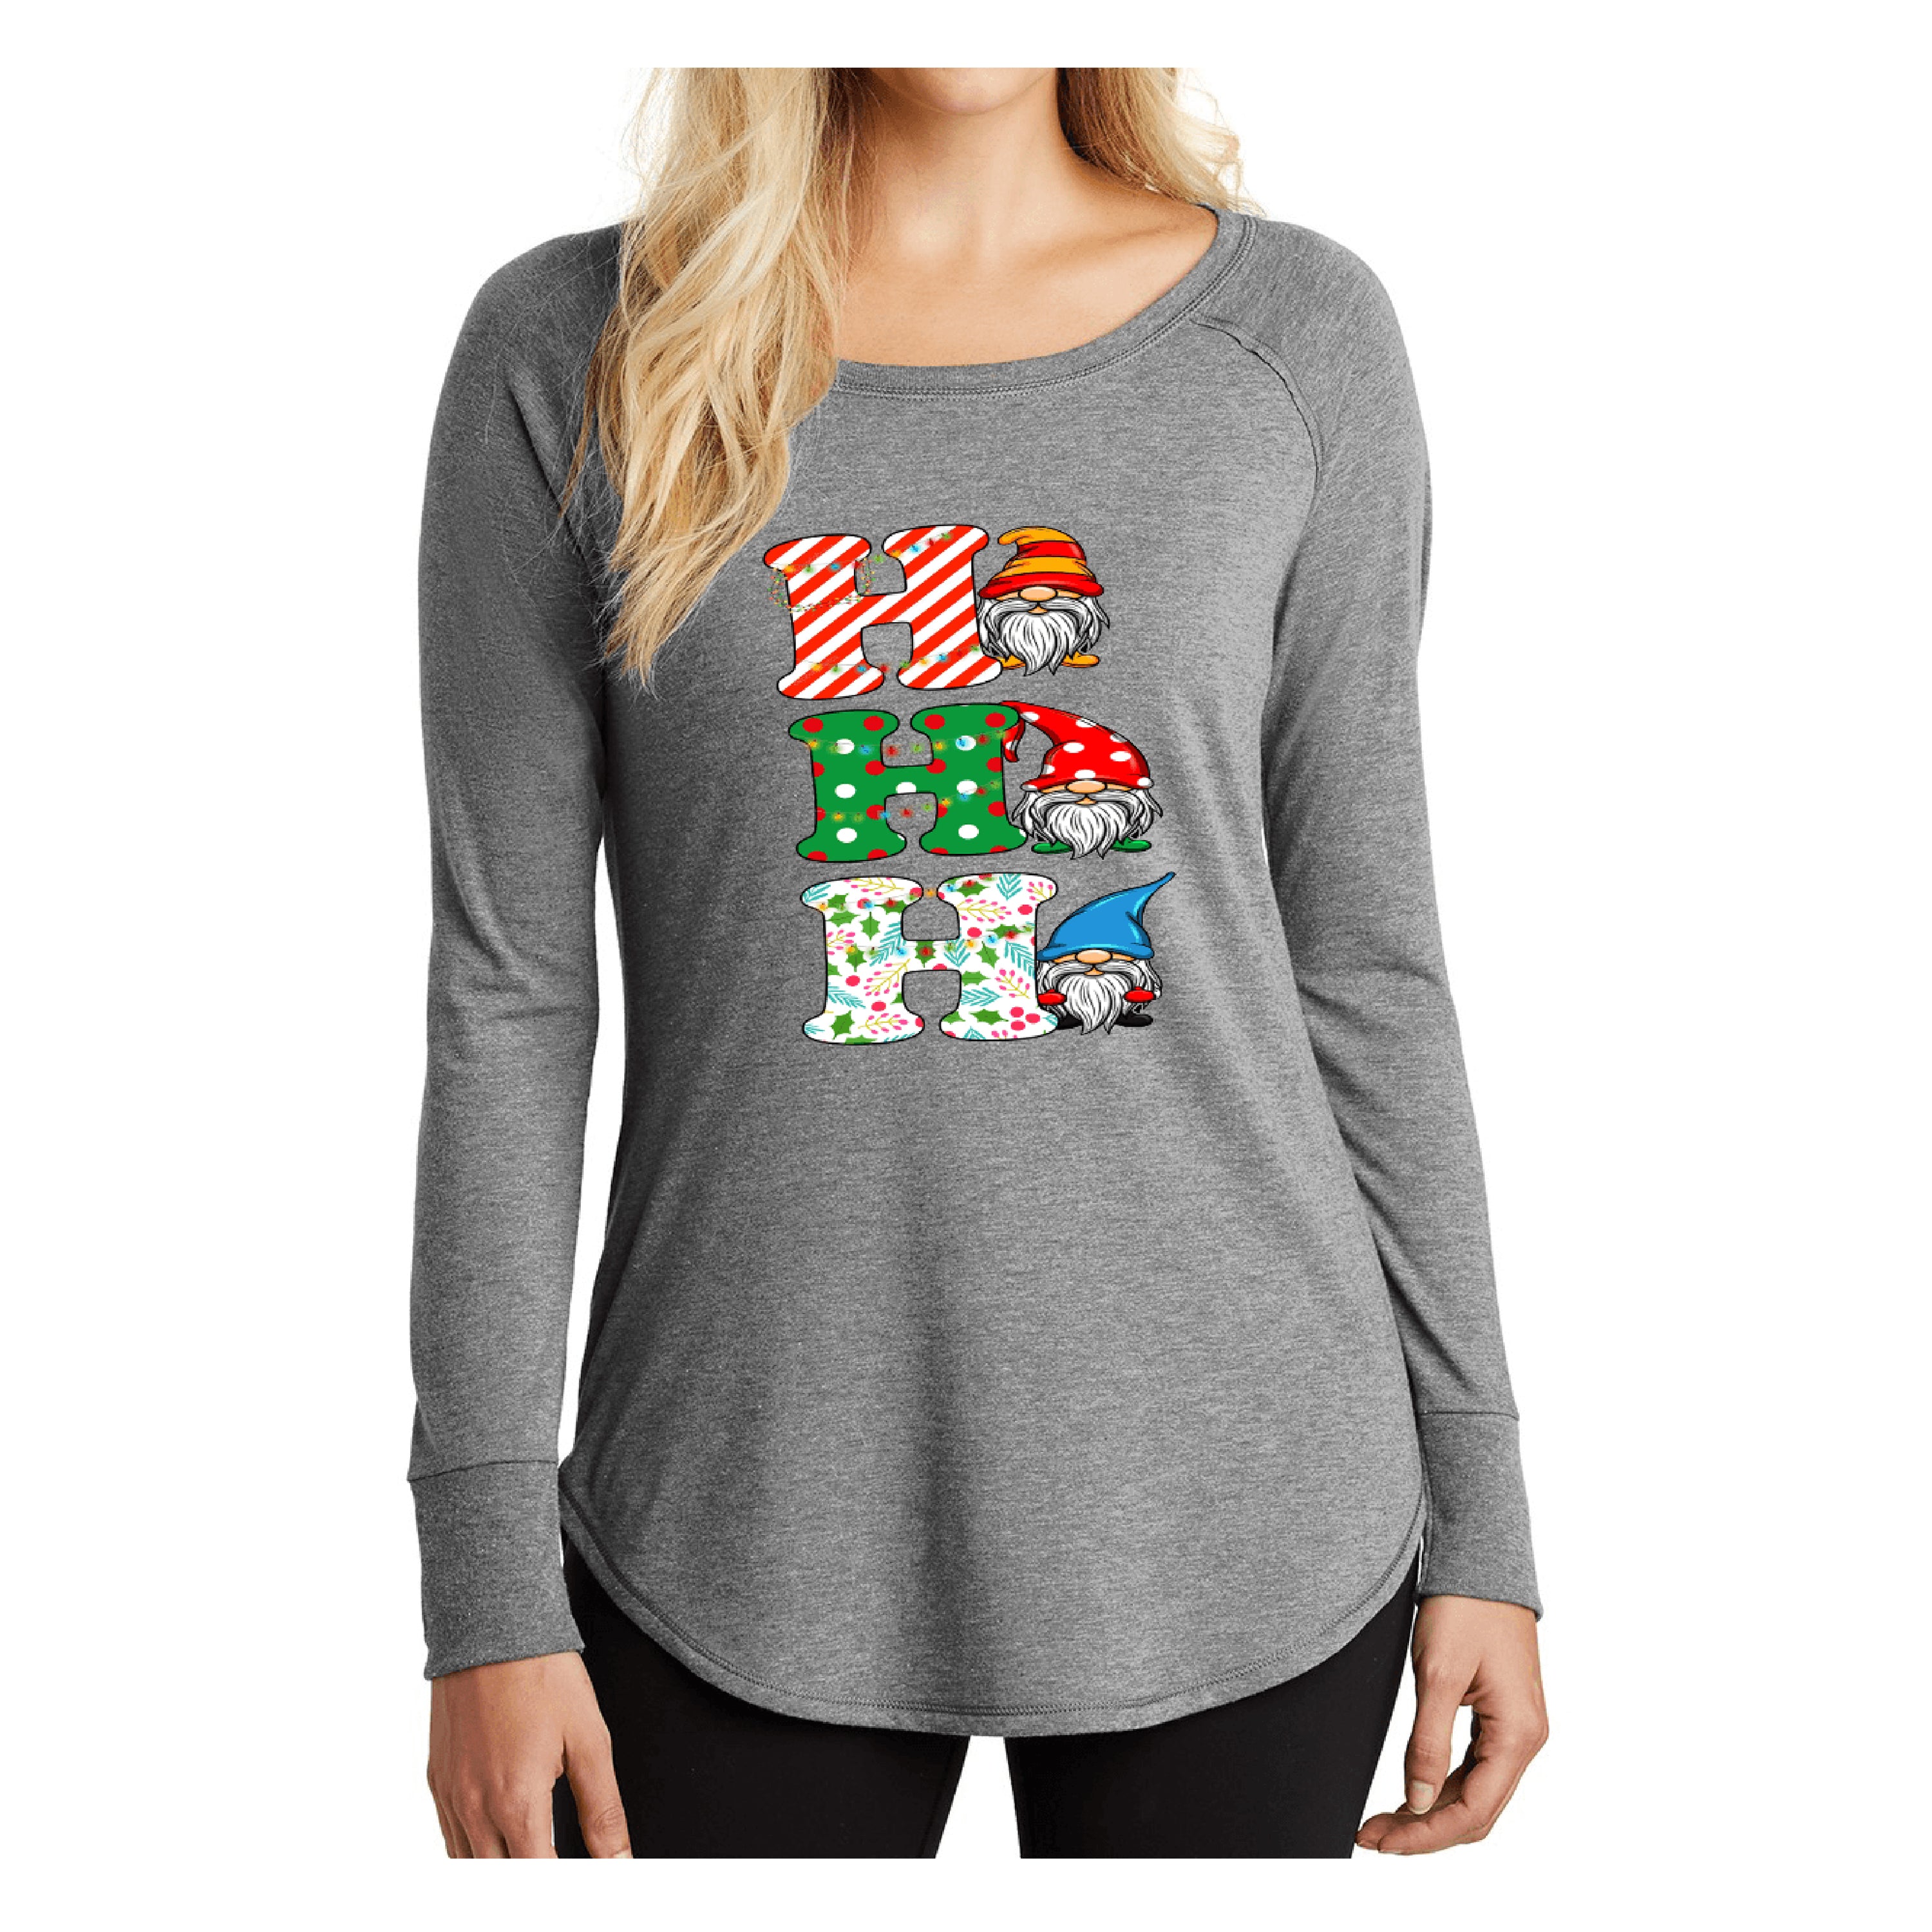 "SPECIAL DESIGN FOR CHRISTMAS HHH"- Stylish Long-Sleeve Tee